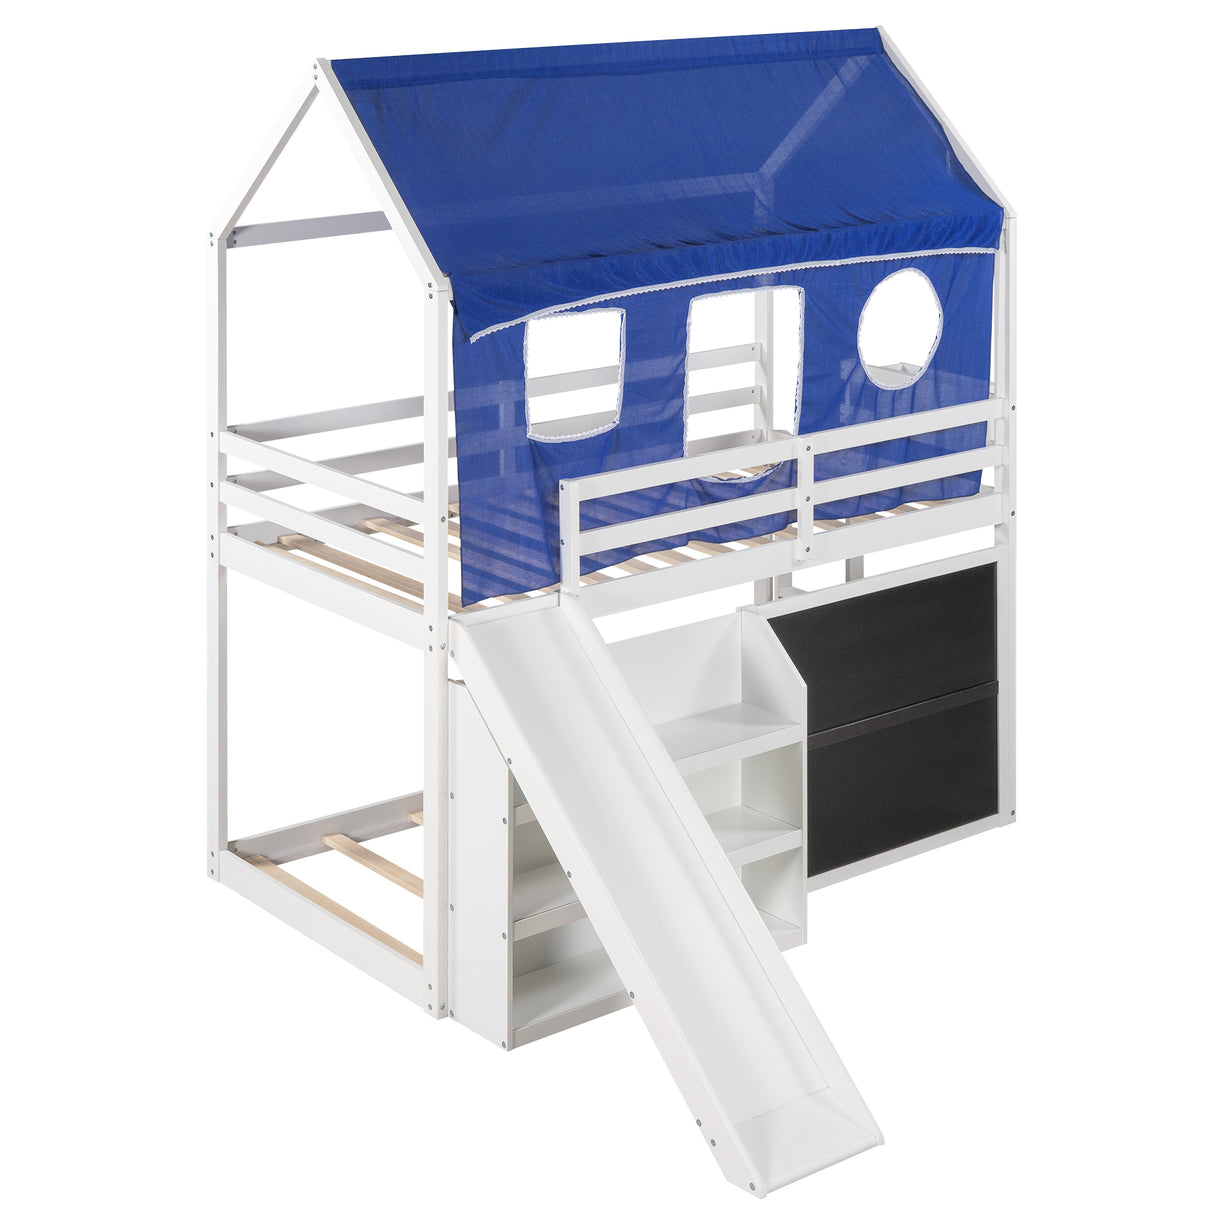 Twin over Twin House Bunk Bed with Blue Tent, Slide, Shelves and Blackboard, White - Home Elegance USA